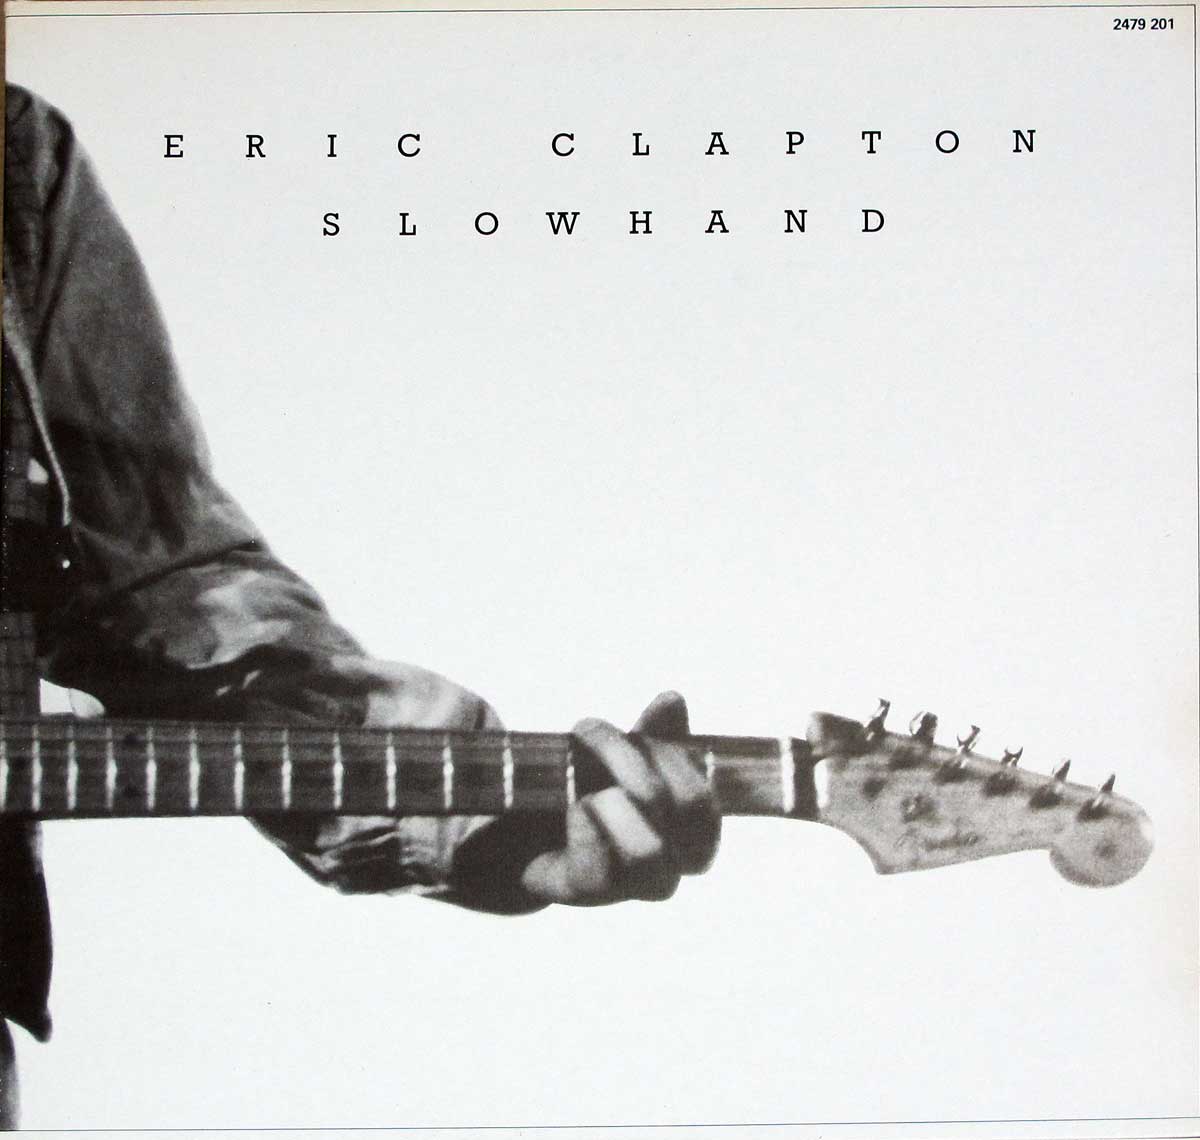 large album front cover photo of: ERIC CLAPTON  SLOWHAND 